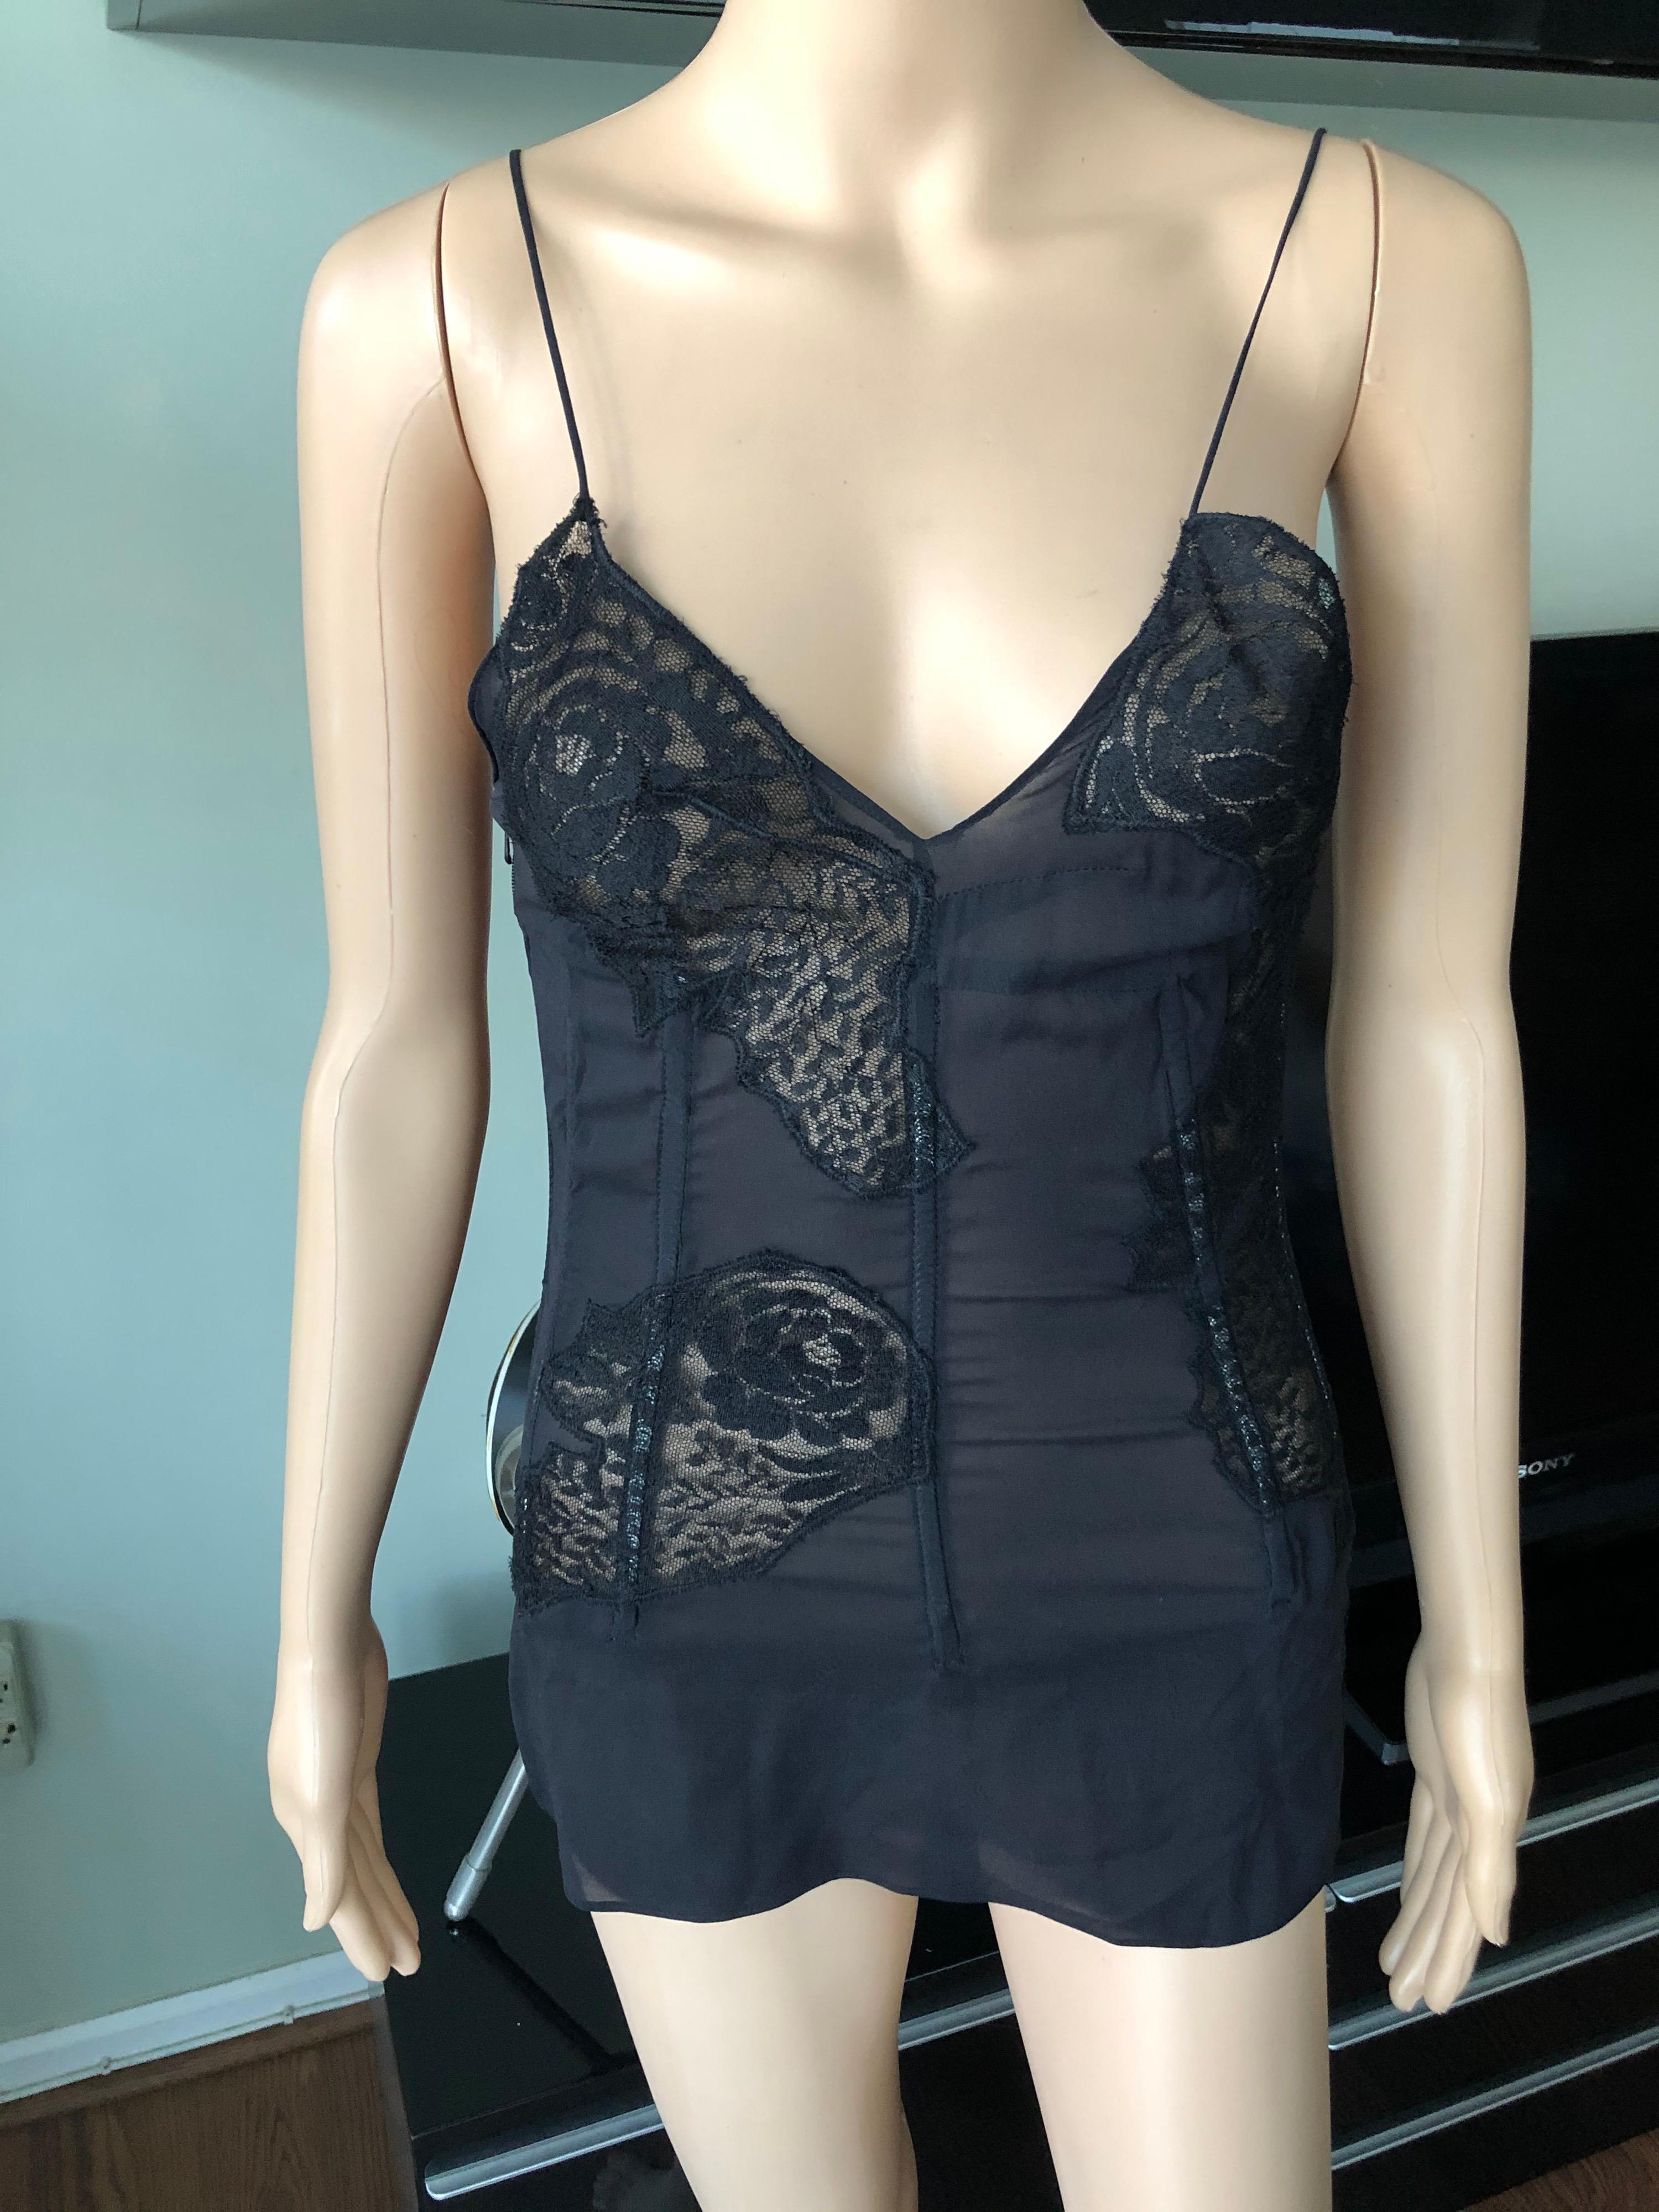 Dolce & Gabbana c. 2000 Sheer Silk and Lace Black Corset Top IT 42

Dolce & Gabbana silk top featuring lace panels throughout, V-neck, lace-up detail at back and zip closure at side.
